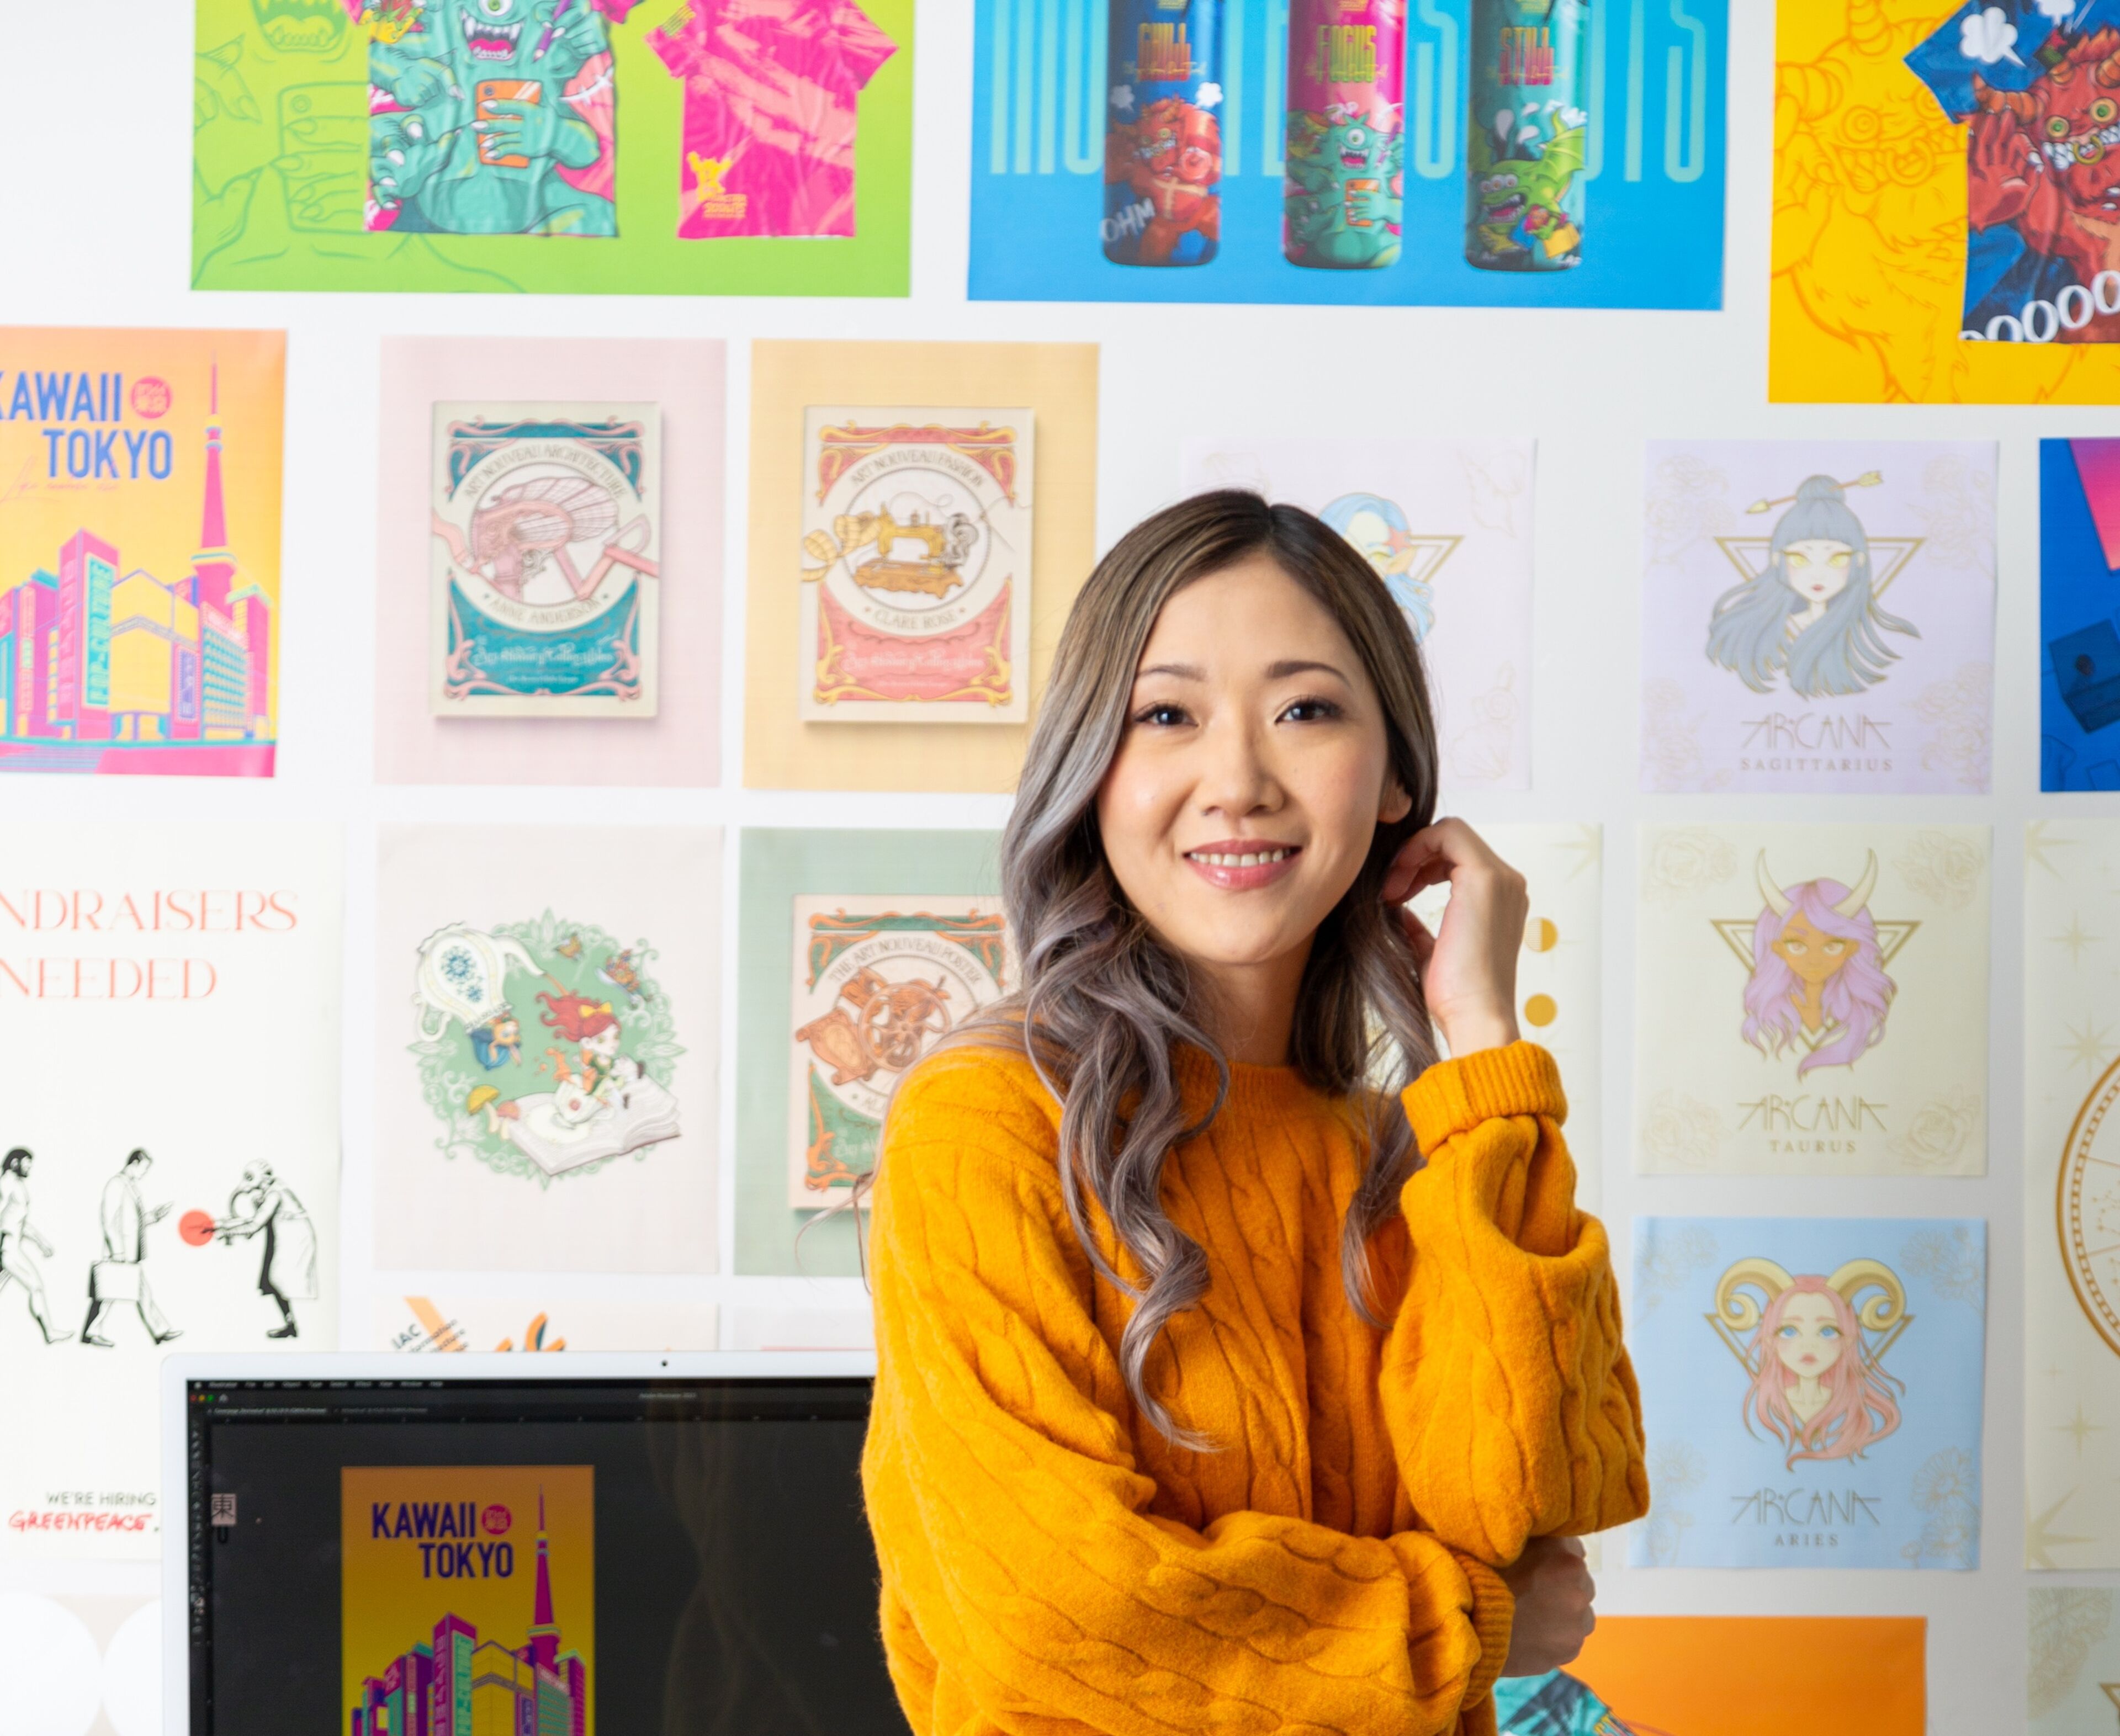 A smiling woman in a mustard sweater and skirt sits at a desk adorned with colorful art and design paraphernalia.